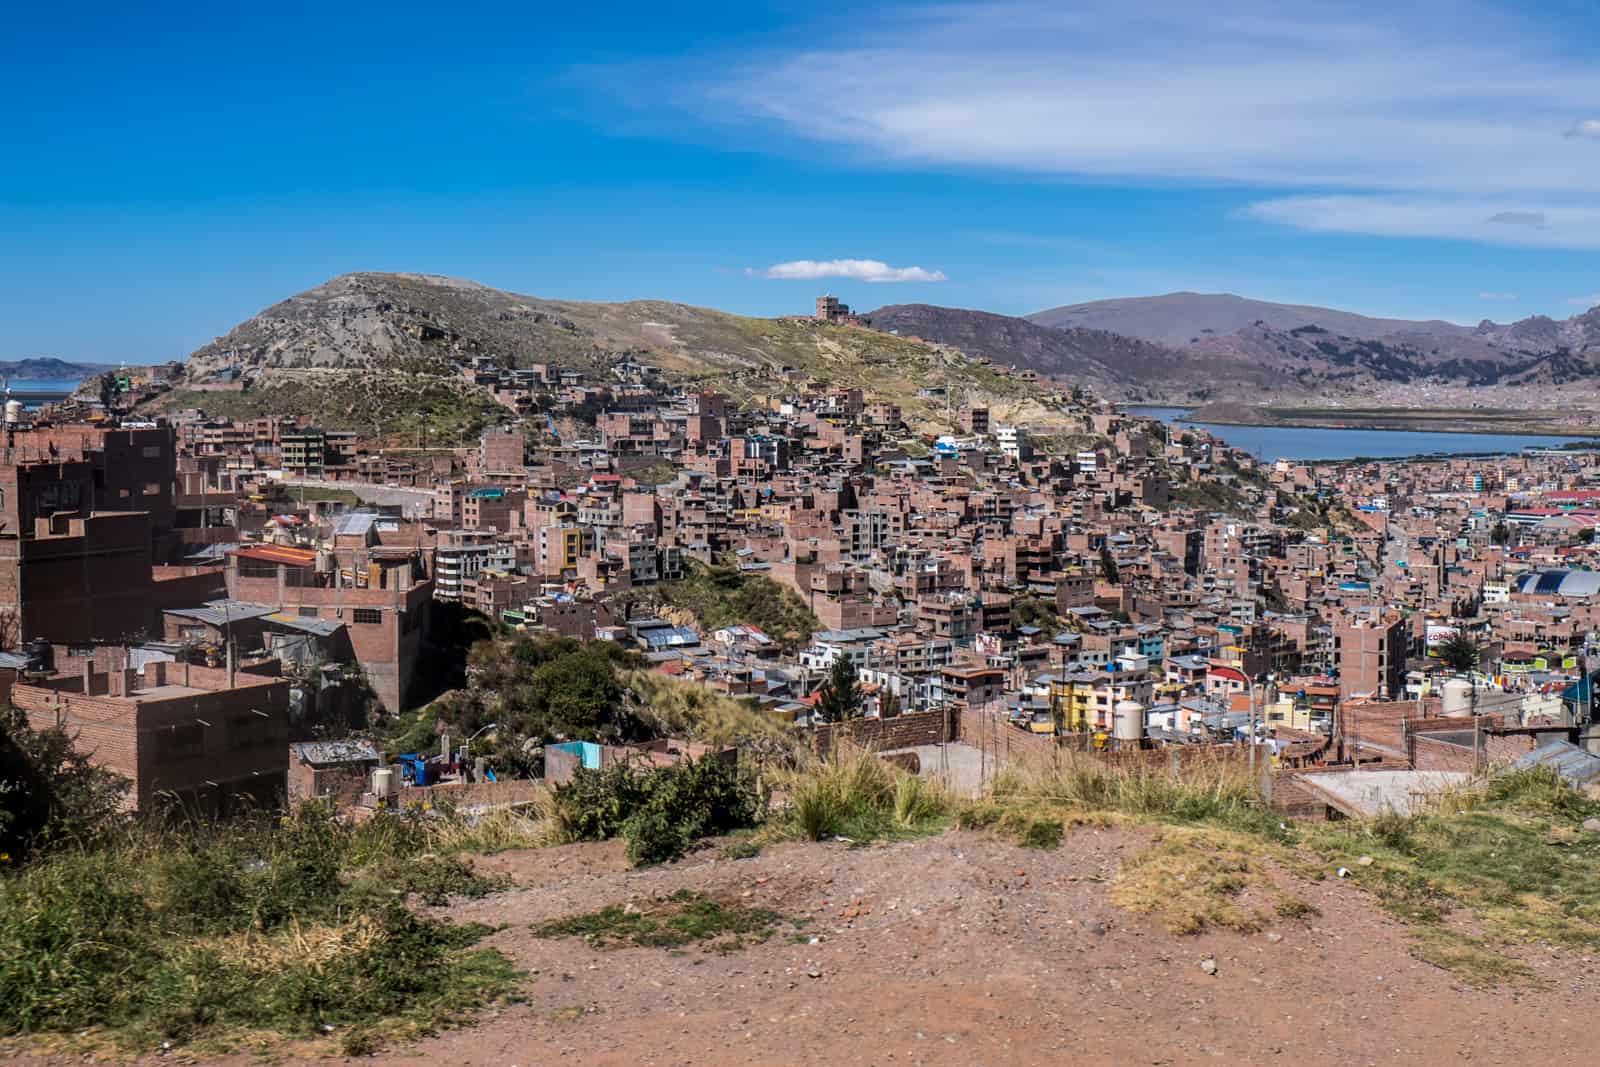 Elevated view over the compact town of Puno next to Lake Titicaca in Peru.